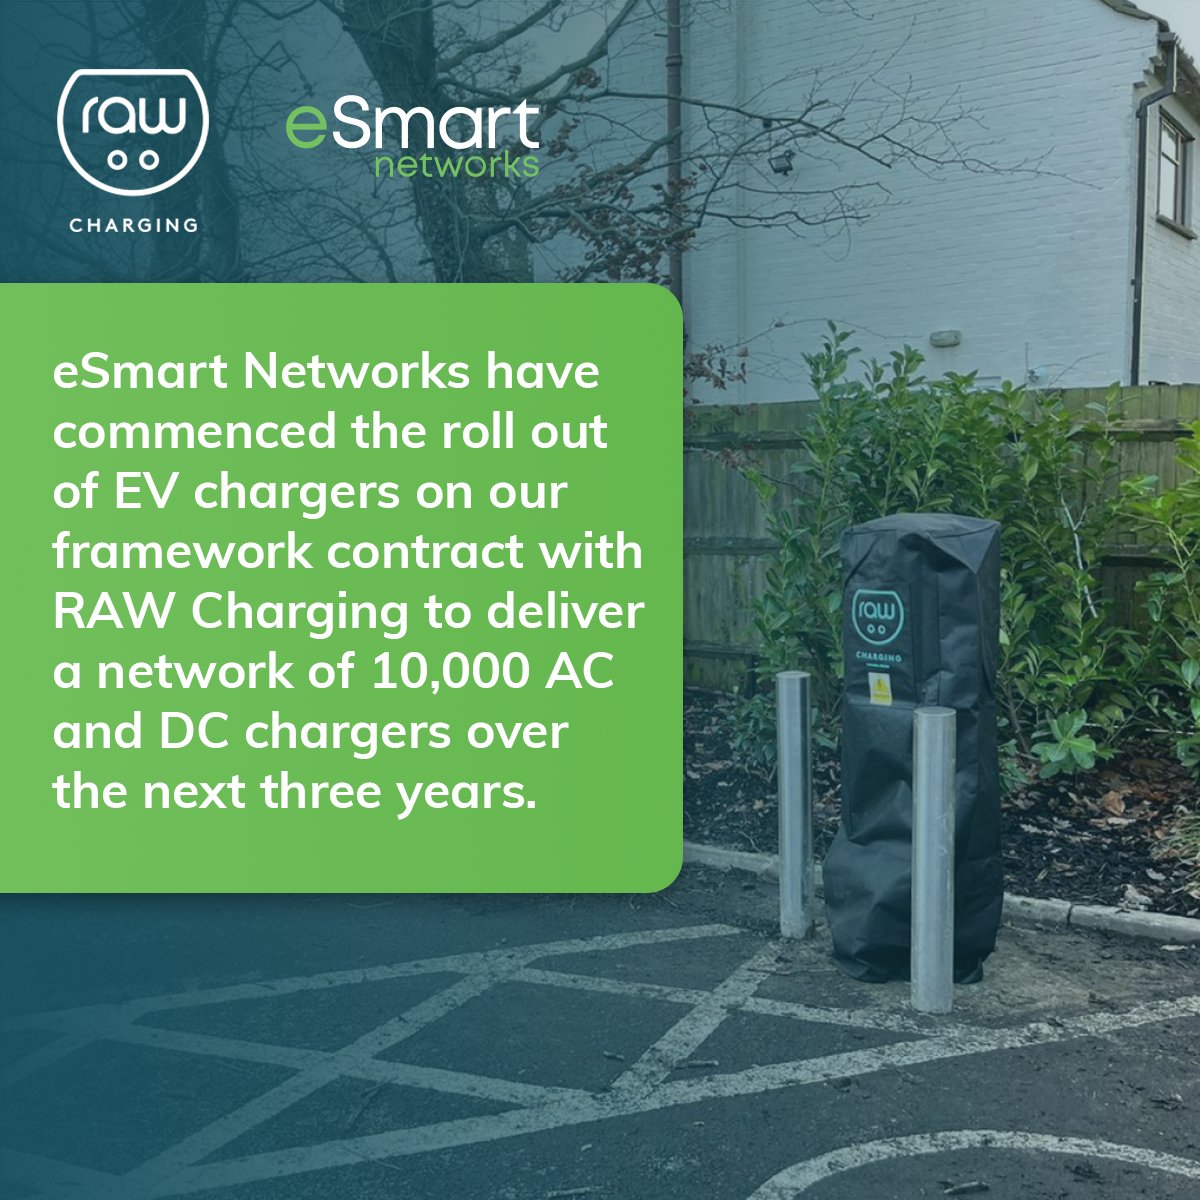 @eSmartNetworks1 have commenced the roll out of EV chargers on a framework contract with @RawCharging  to deliver EV charging infrastructure across Greene King pubs ⚡ 

(1/2)

#EVCharging #EnergyTransition #RAWCharging #EV